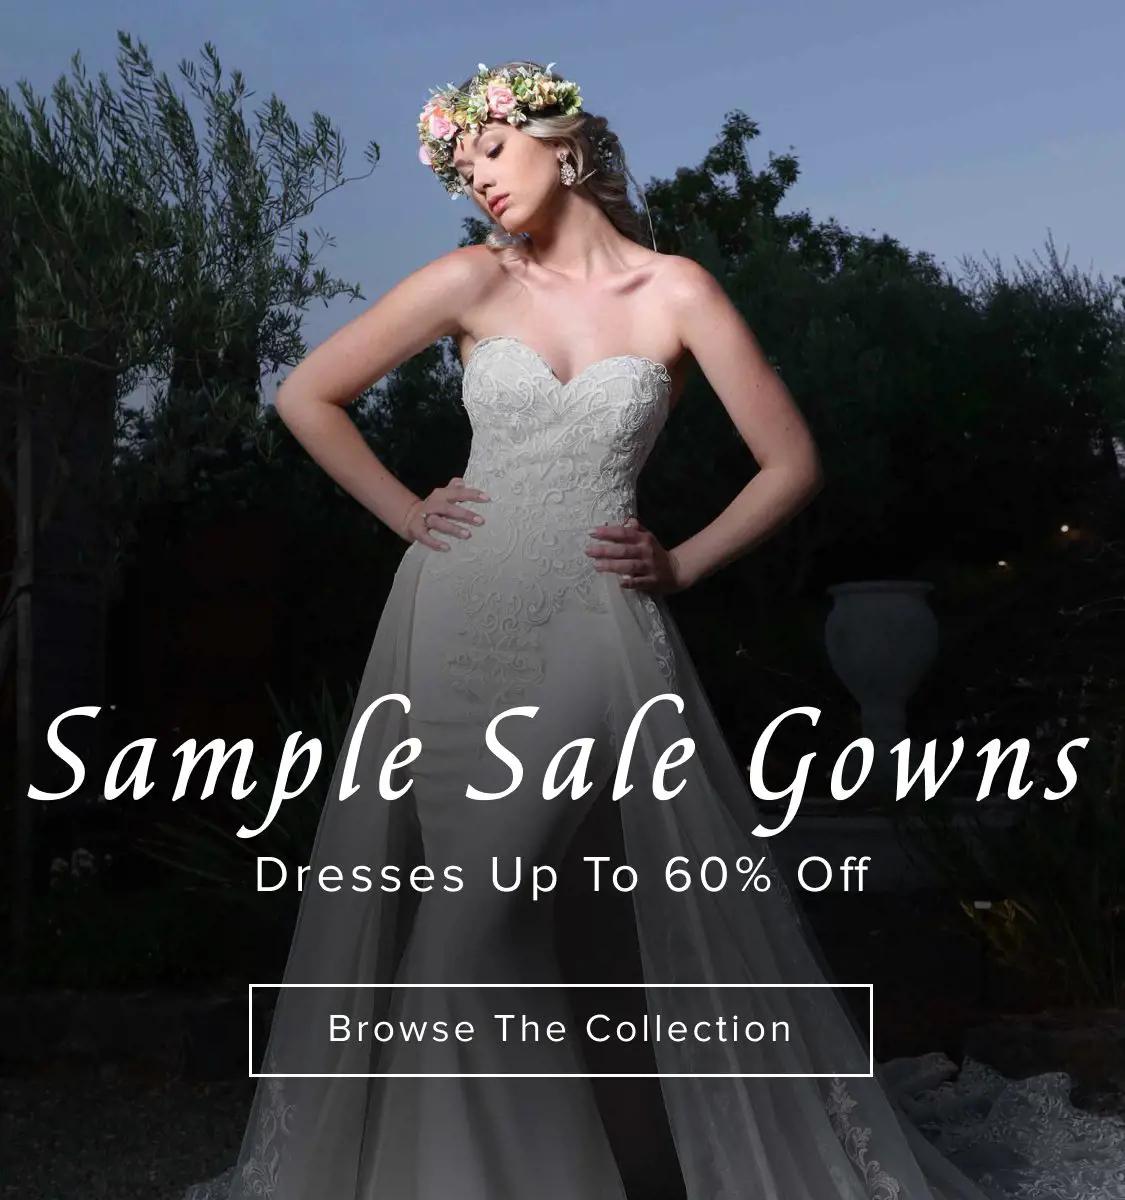 End of Year Bridal Gown Sale on December 10th